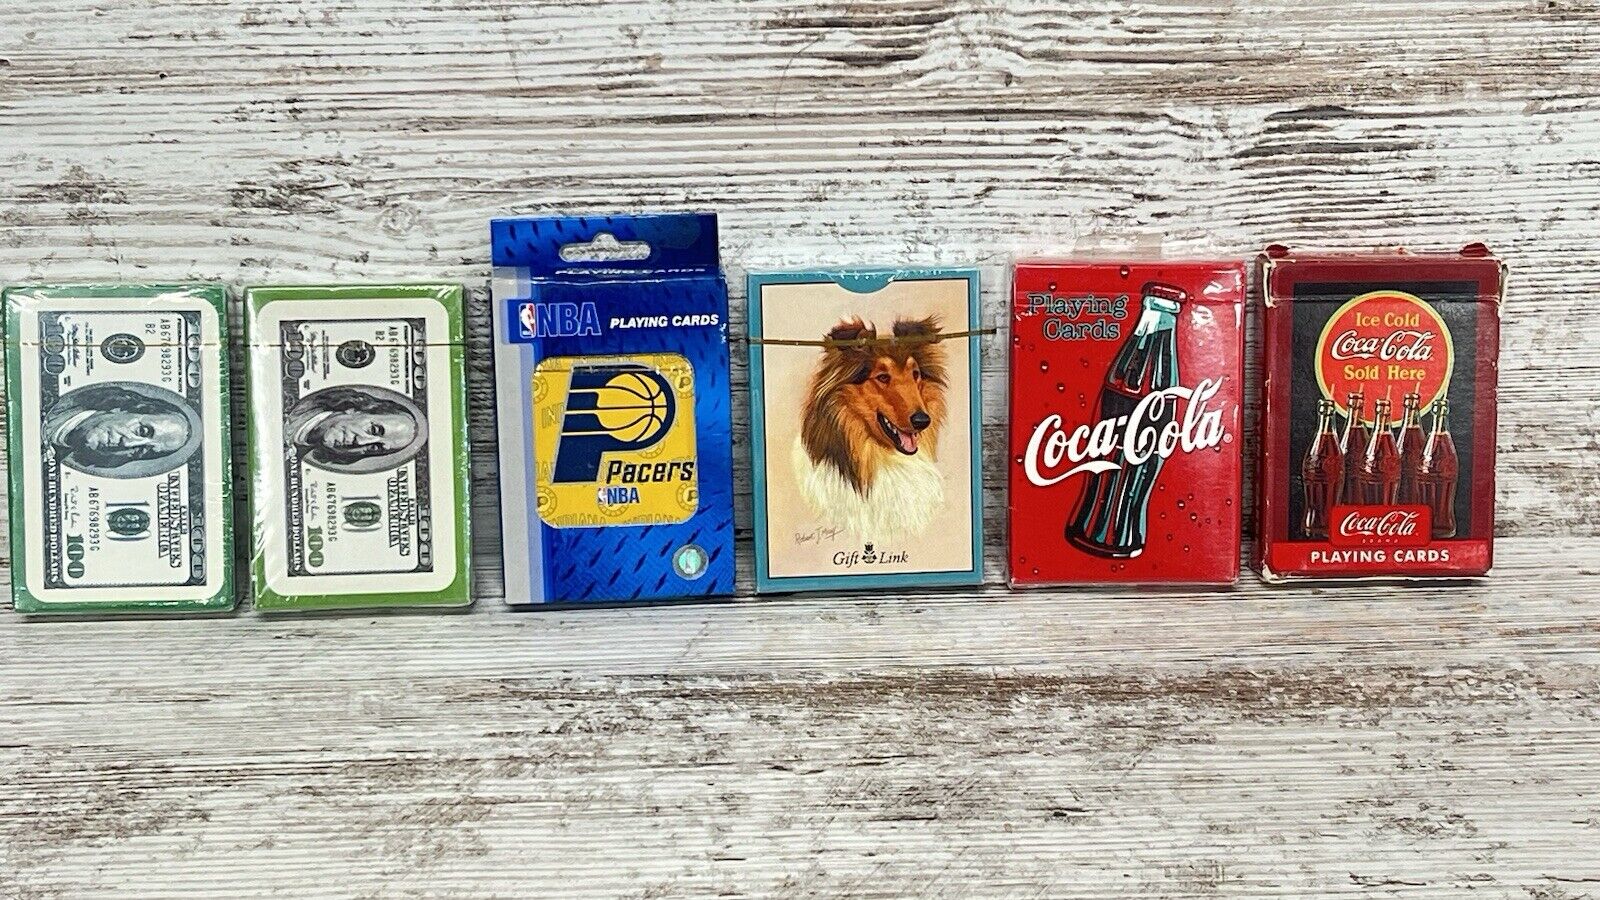 Lot Of Playing Cards- Cash Coke Coca-cola Dogs Collie NBA pacers